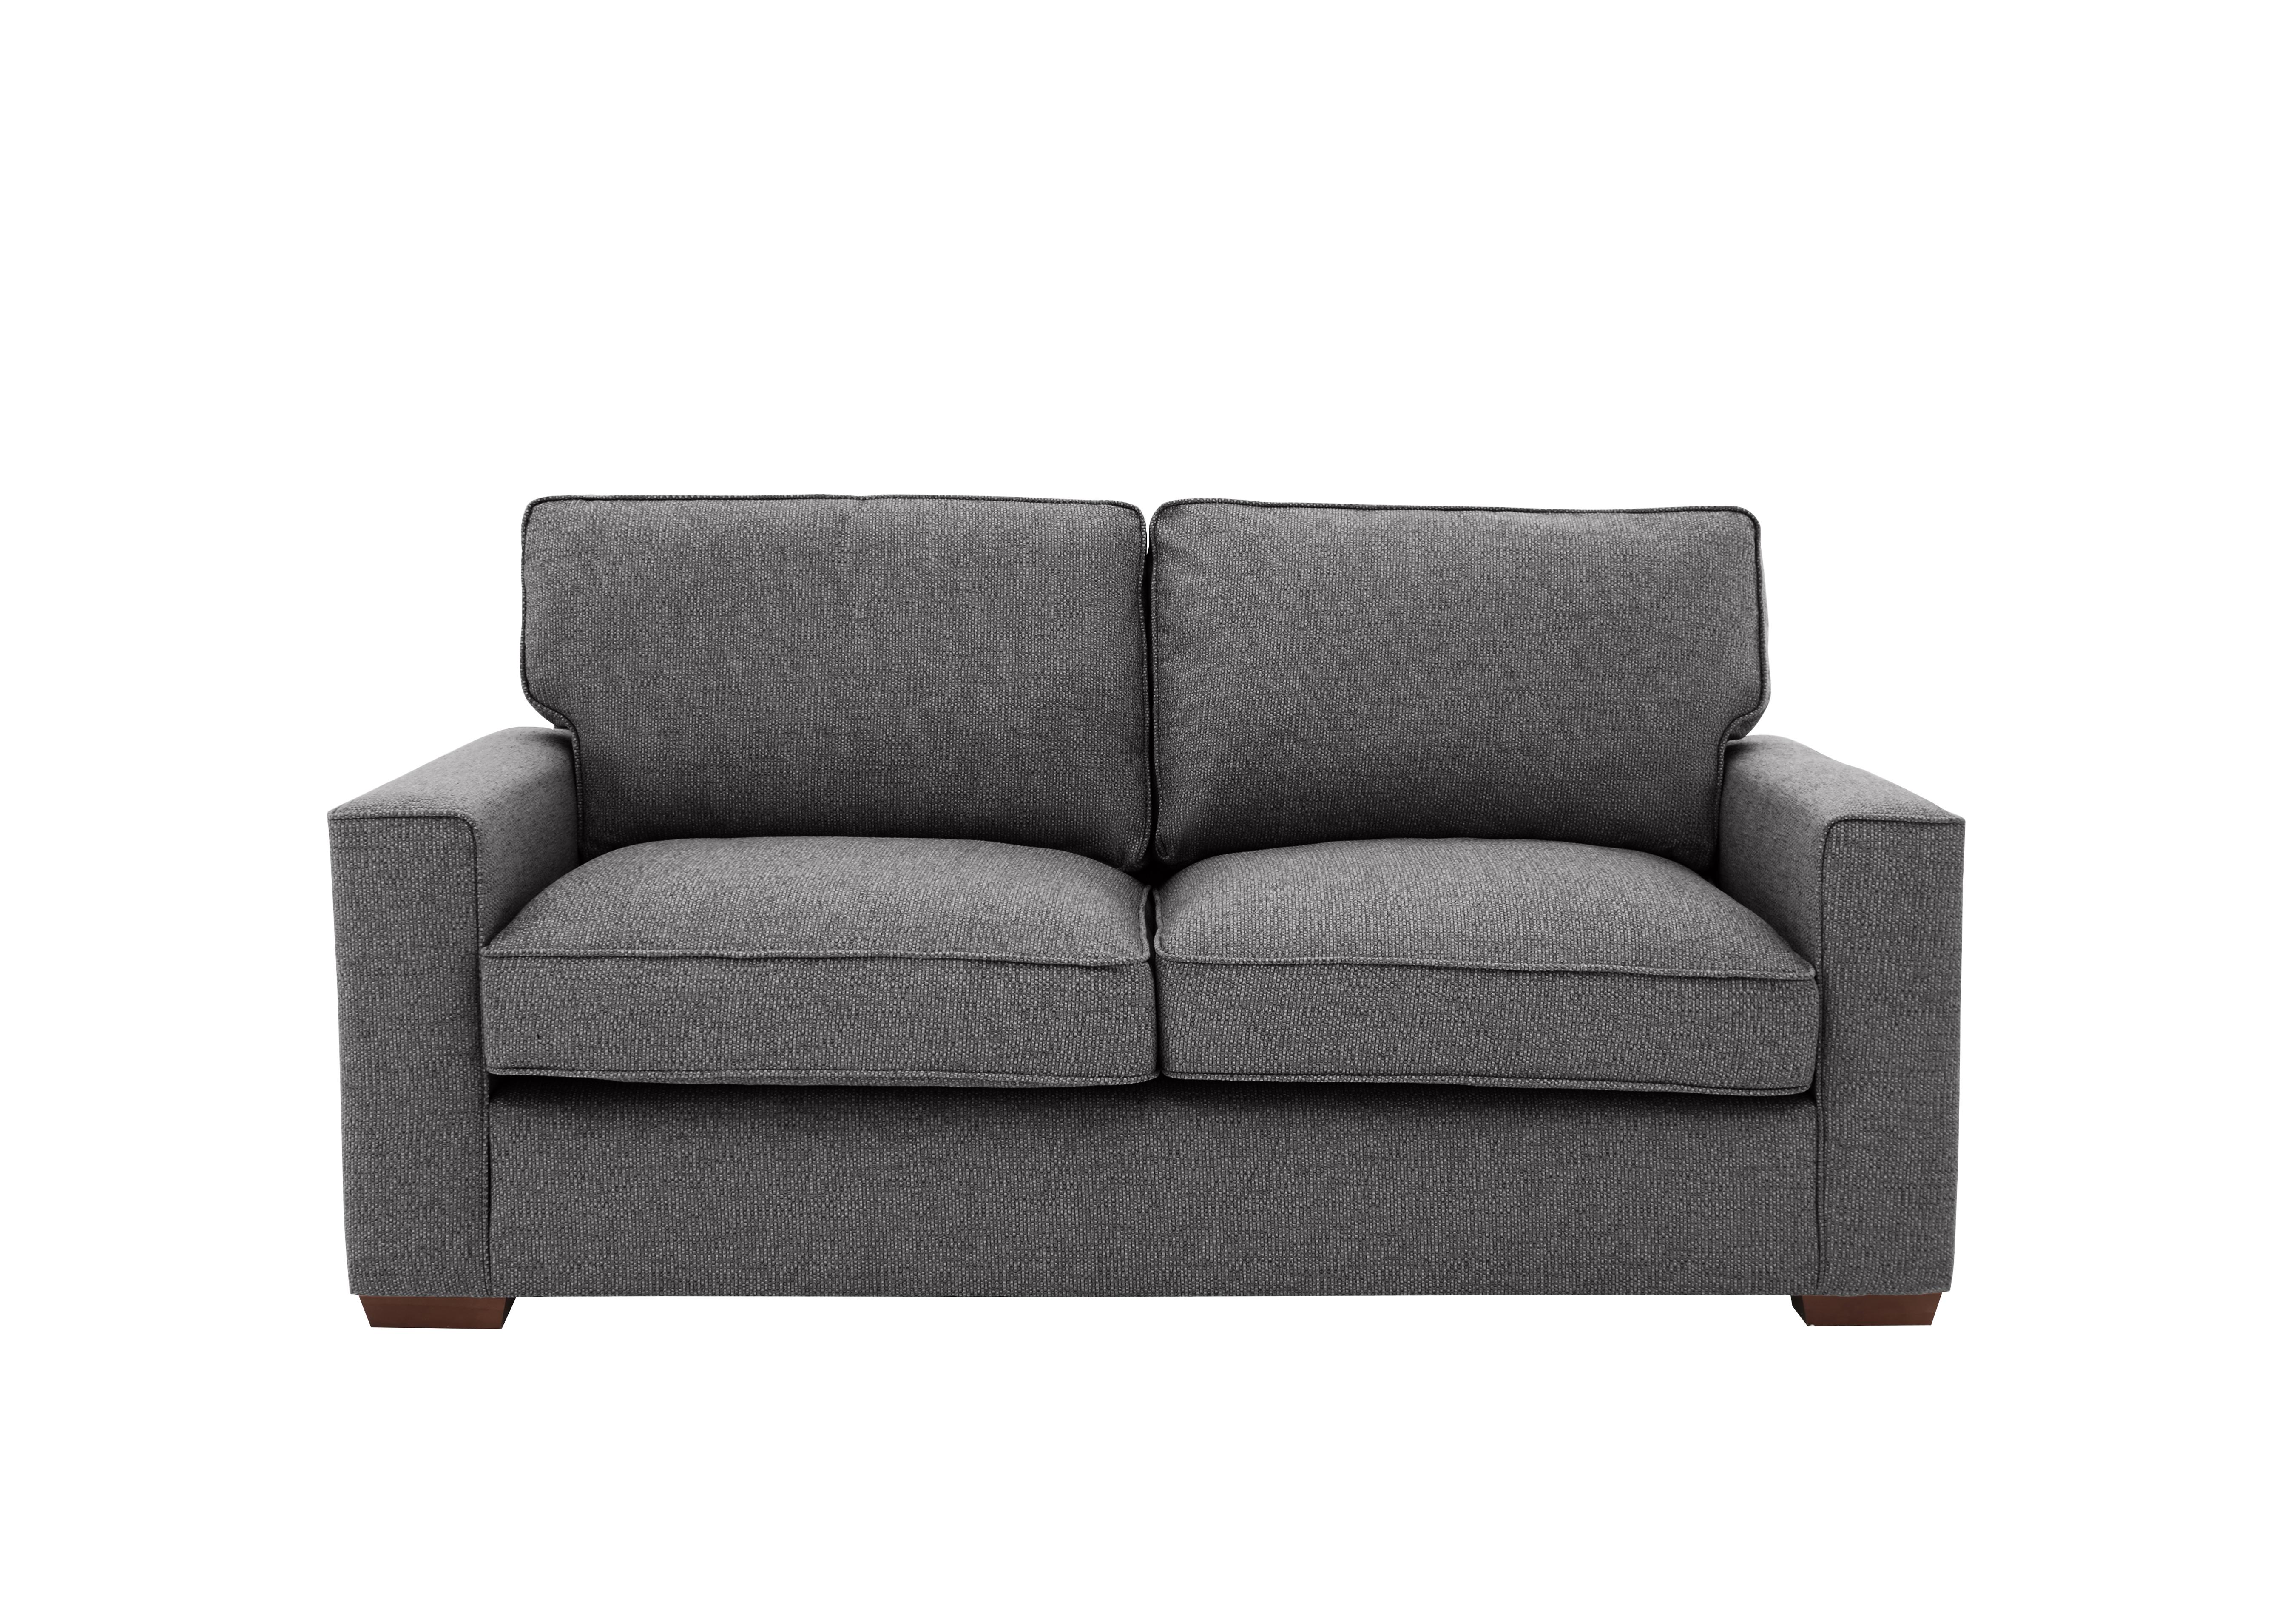 Cory 3 Seater Fabric Classic Back Sofa Bed in Dallas Charcoal on Furniture Village